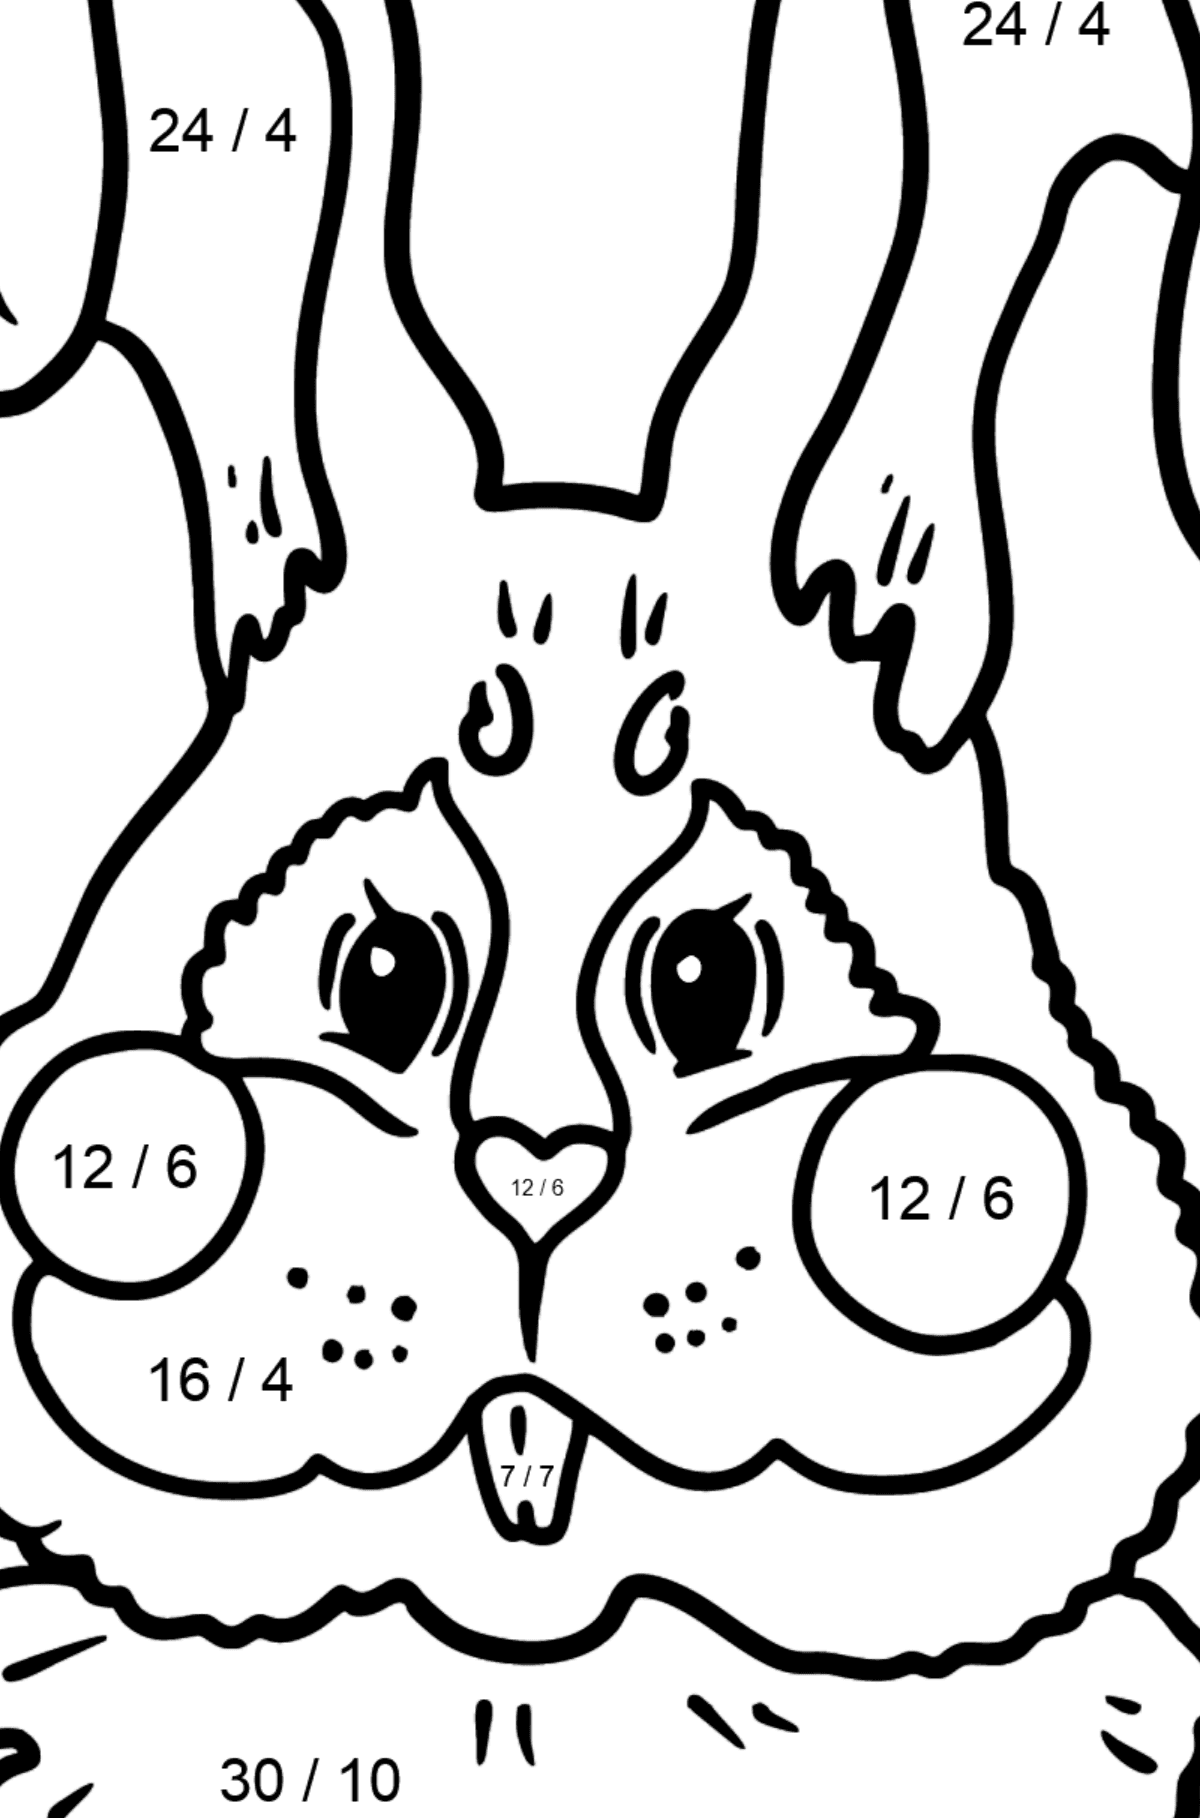 Bunny Face coloring page - Math Coloring - Division for Kids